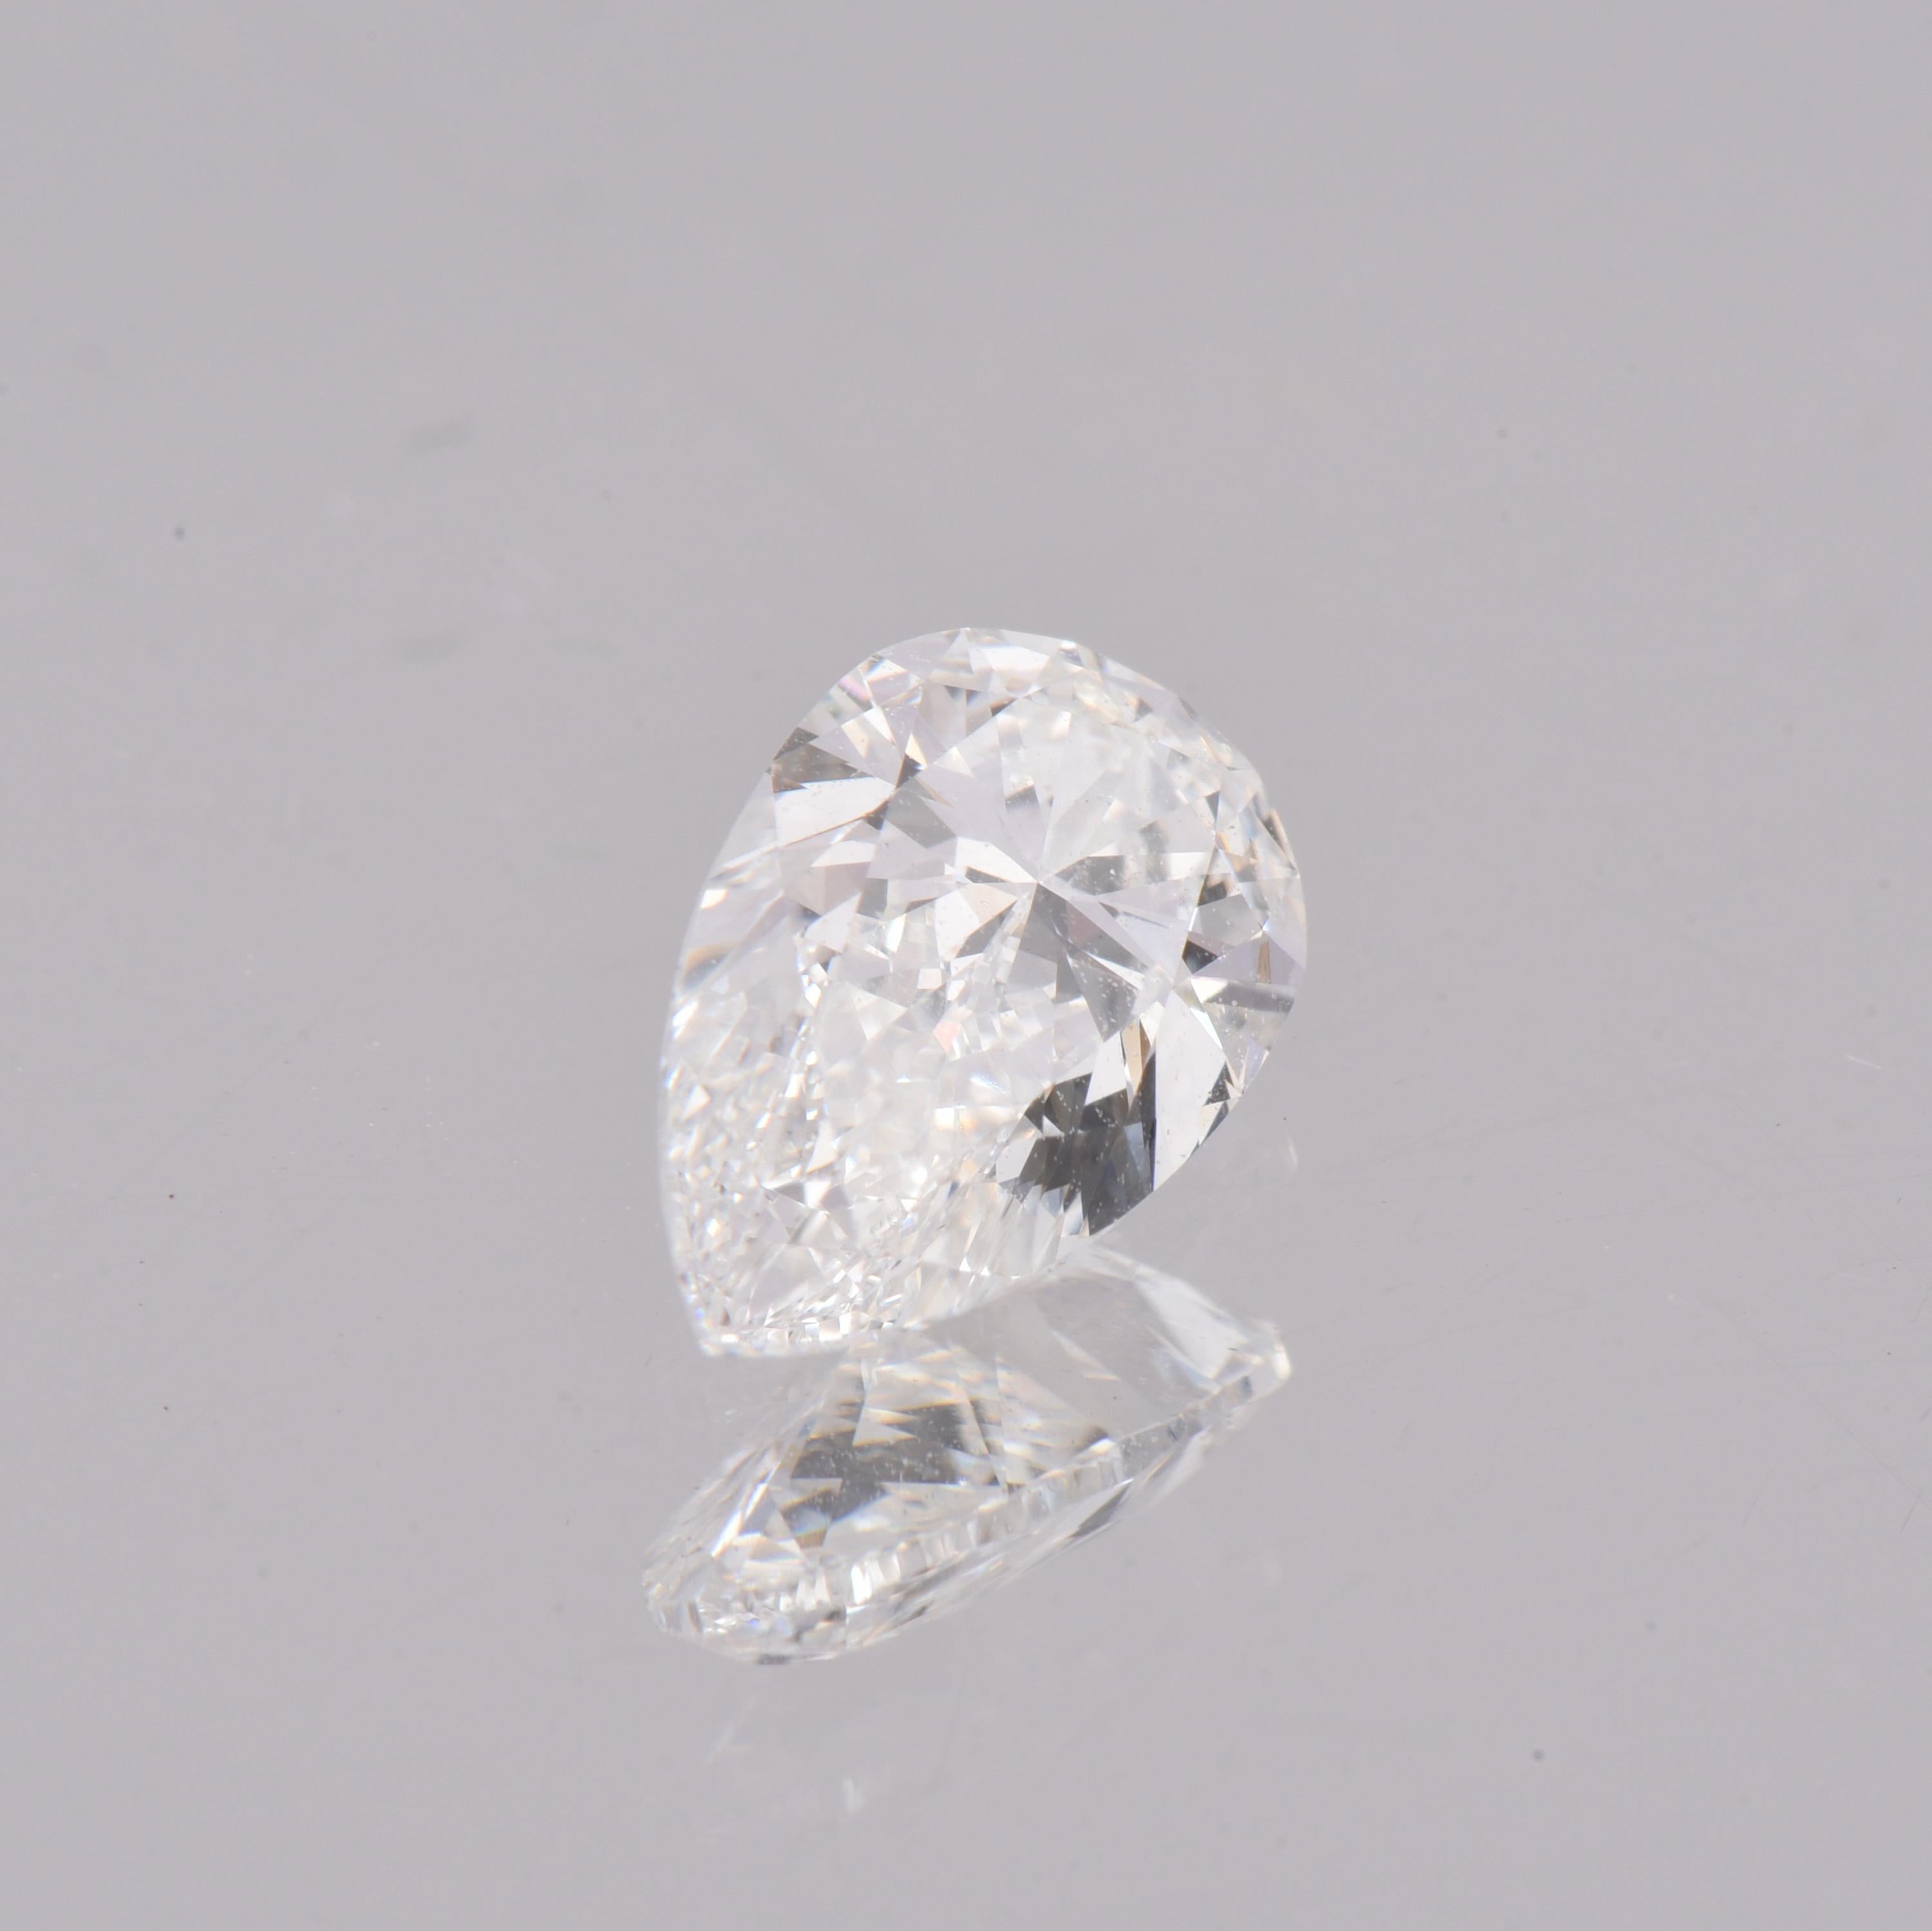 GIA certified, 0.70 carat colorless diamond – certified as F color, VS2 clarity by GIA, this diamond exhibits ideal brilliance, excellent polish and very good symmetry. Measuring 7.83 -4.85 x 2.88 mm, this diamond can be set into an engagement ring